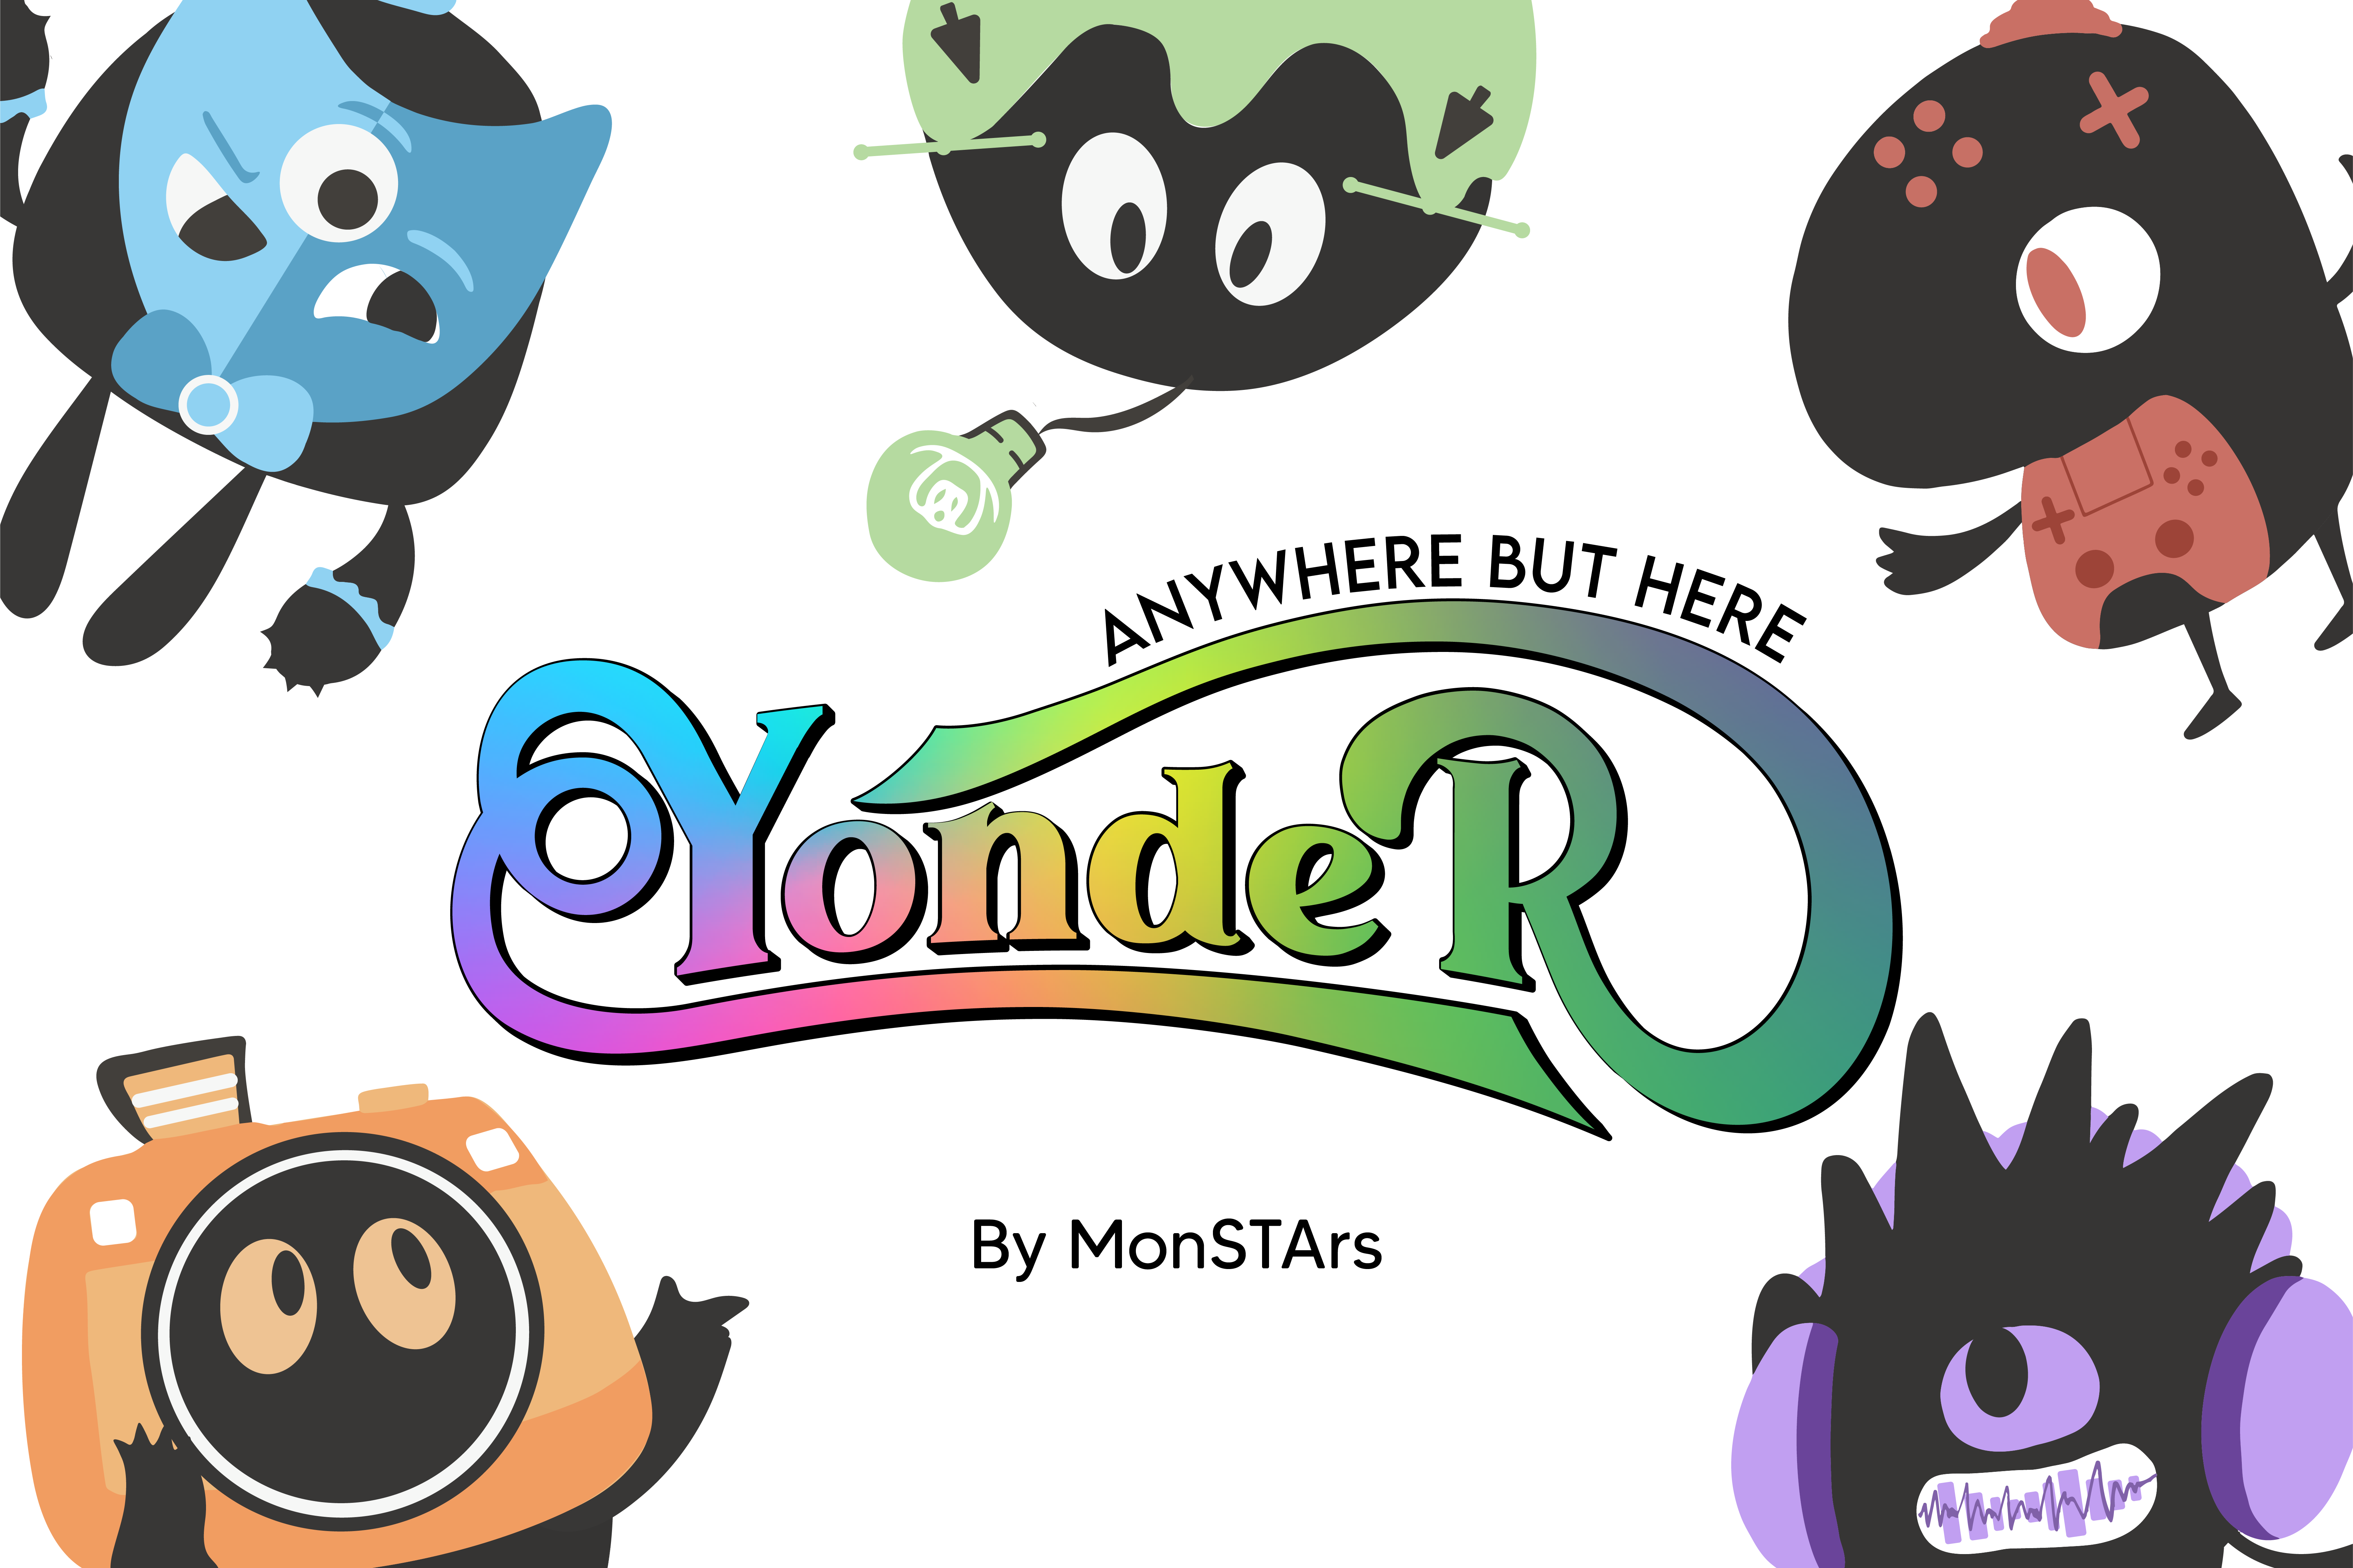 YONDER Logo with diploma-specific mascots surrounding it.